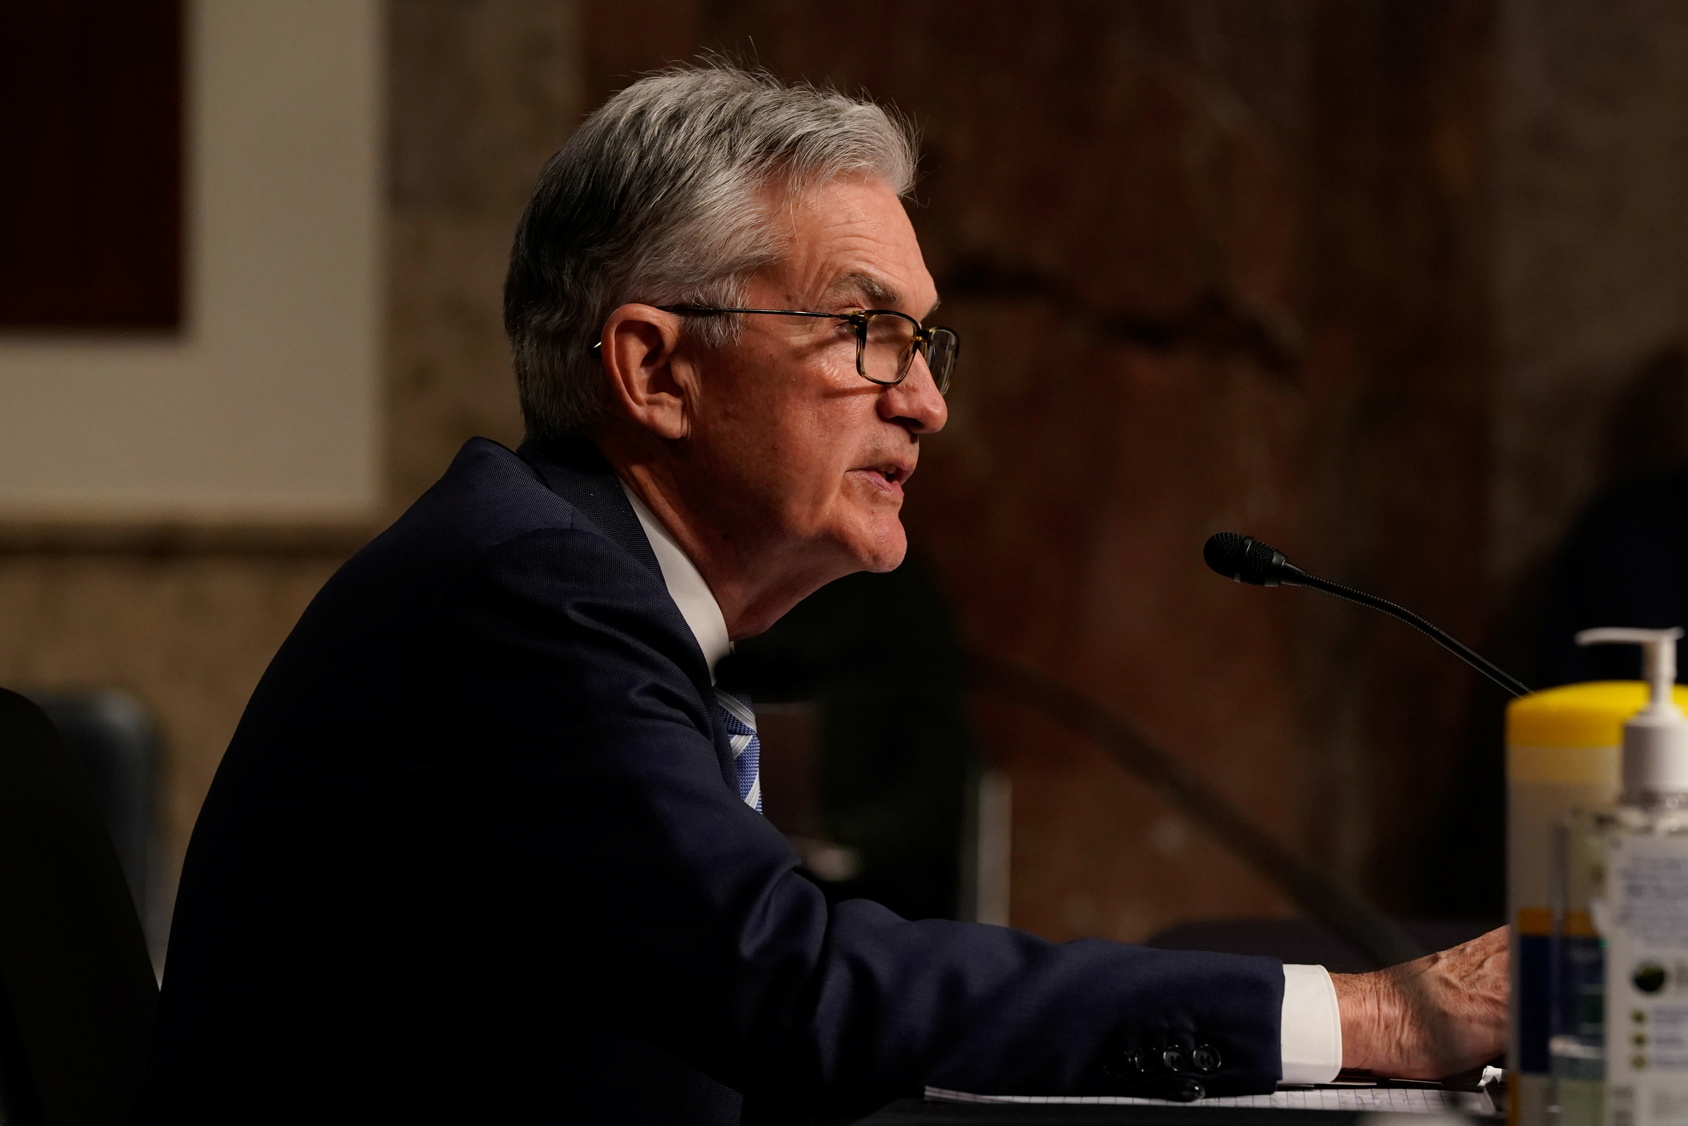 Federal Reserve Chair Jerome Powell testifies before a Senate Banking Committee hybrid hearing on oversight of the Treasury Department and the Federal Reserve on Capitol Hill in Washington, U.S., November 30, 2021. REUTERS/Elizabeth Frantz